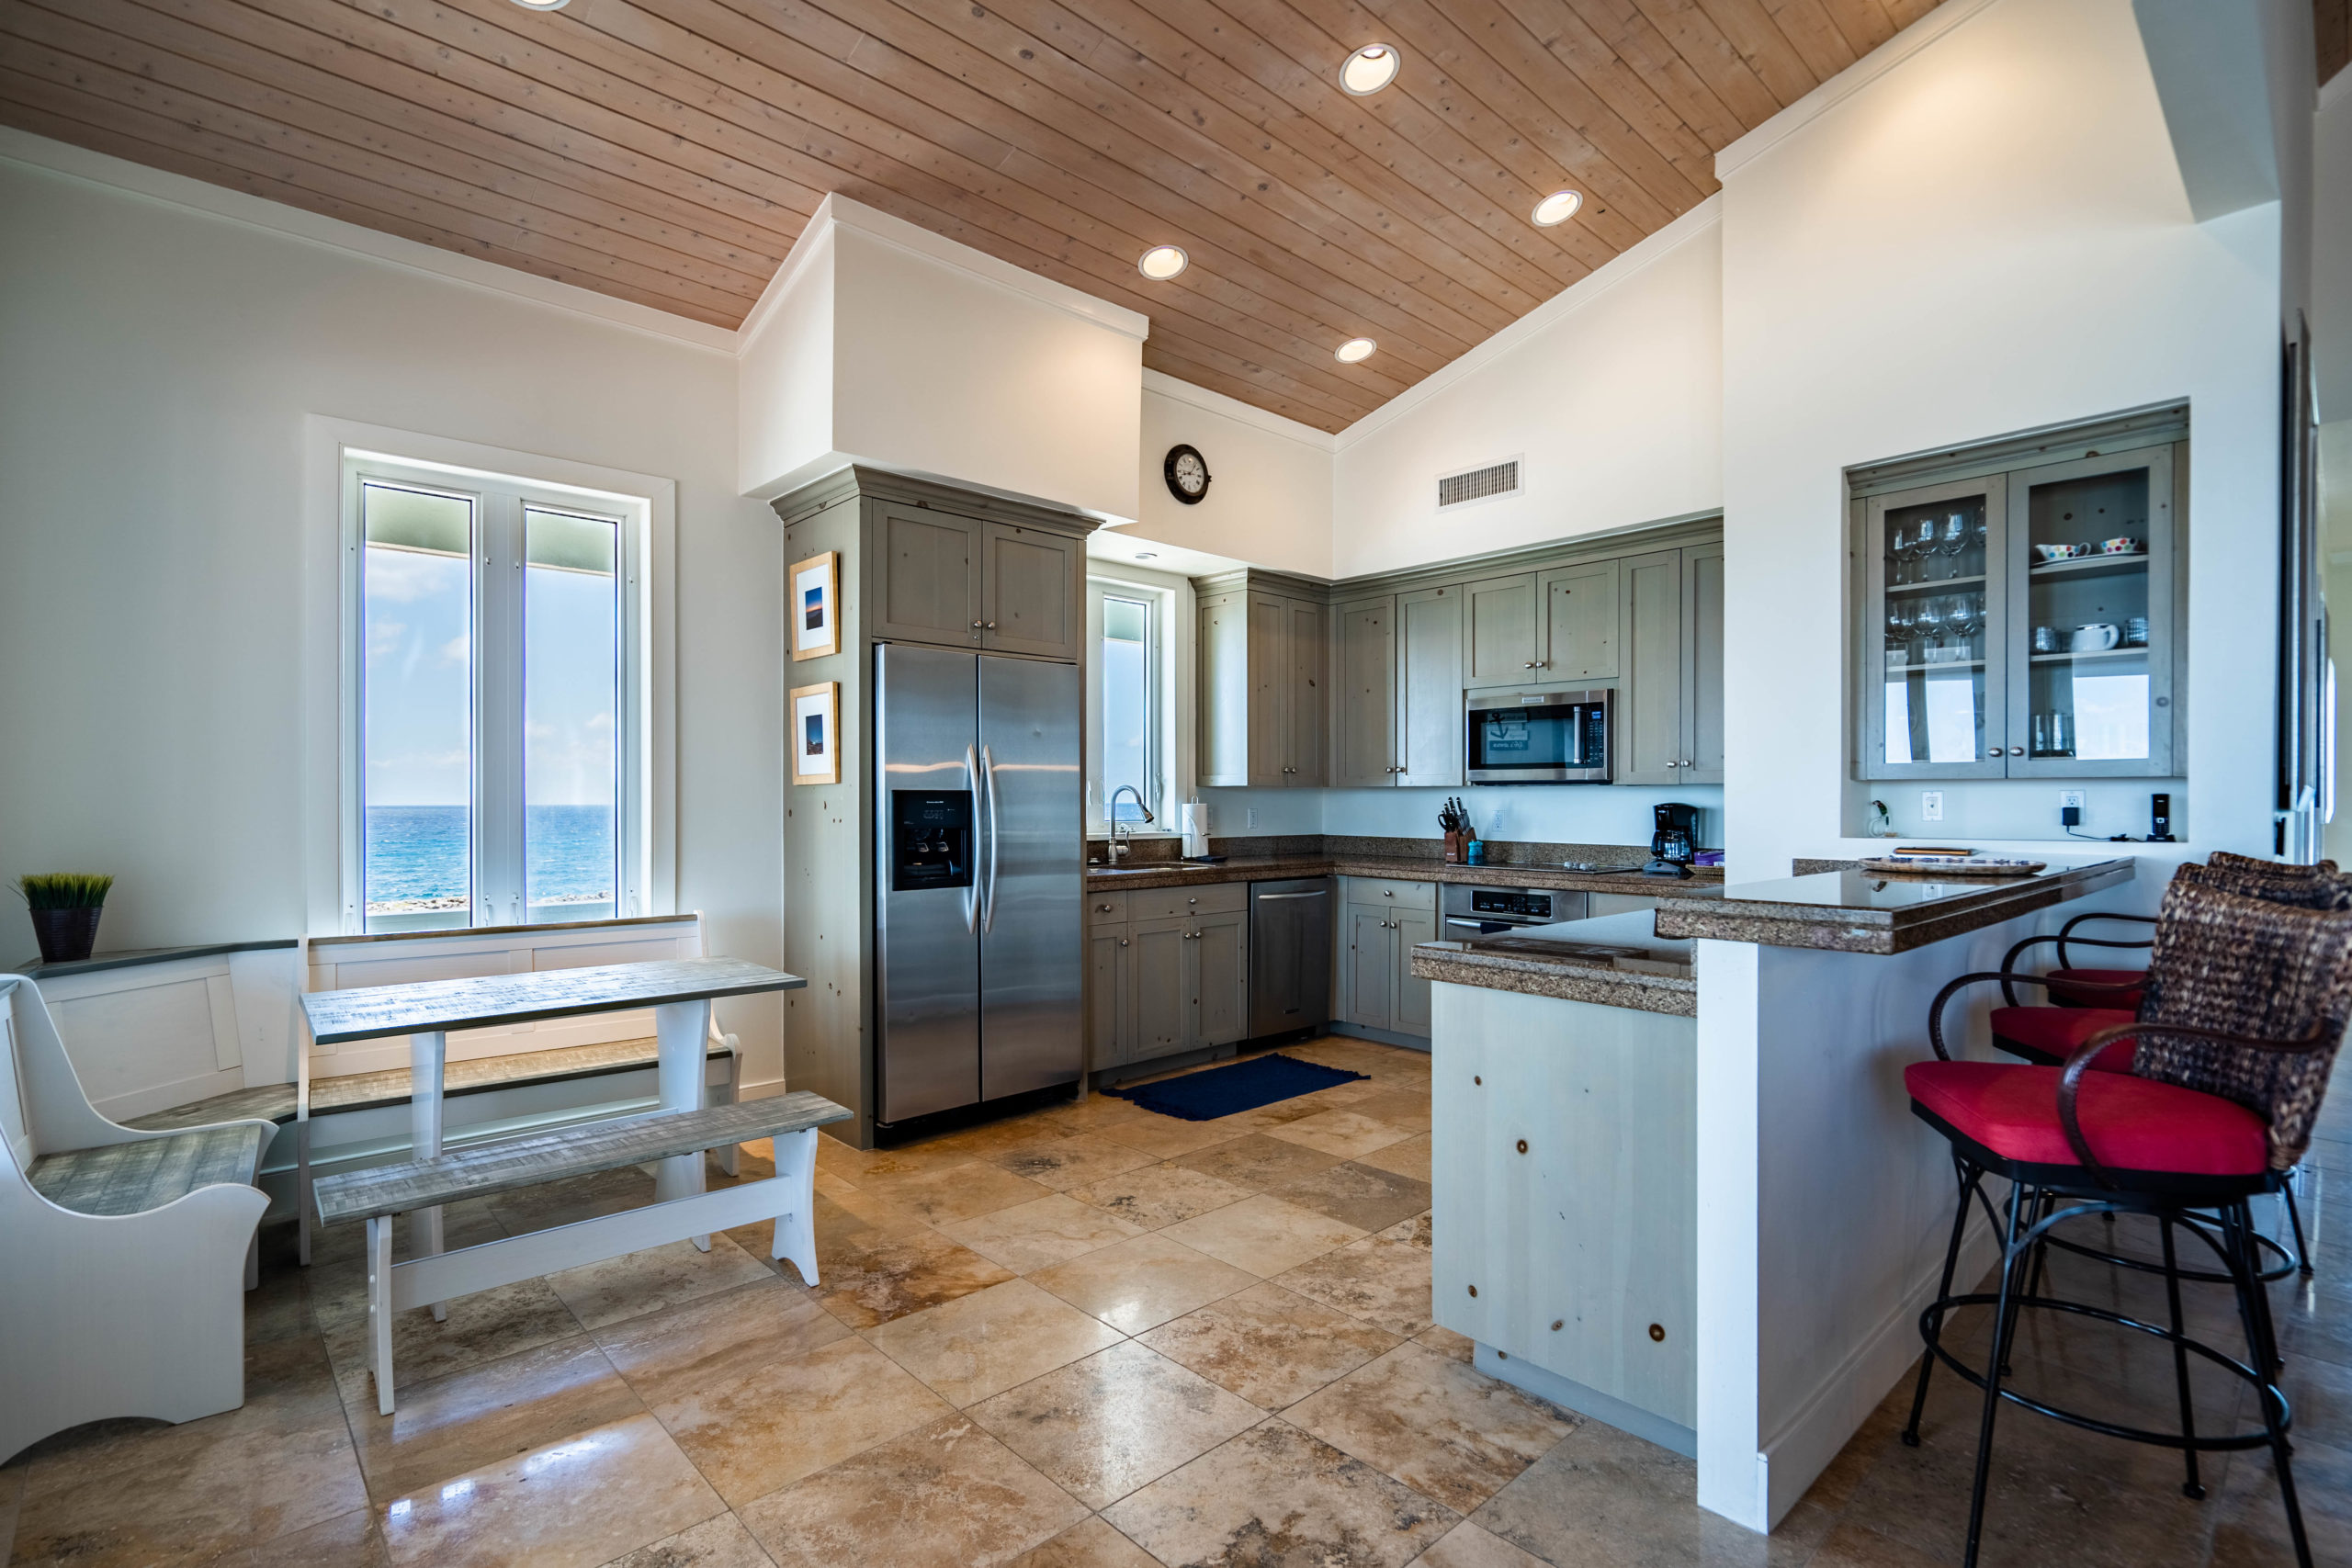 Kitchen view from a beachfront house on Winding Bay Bahamas